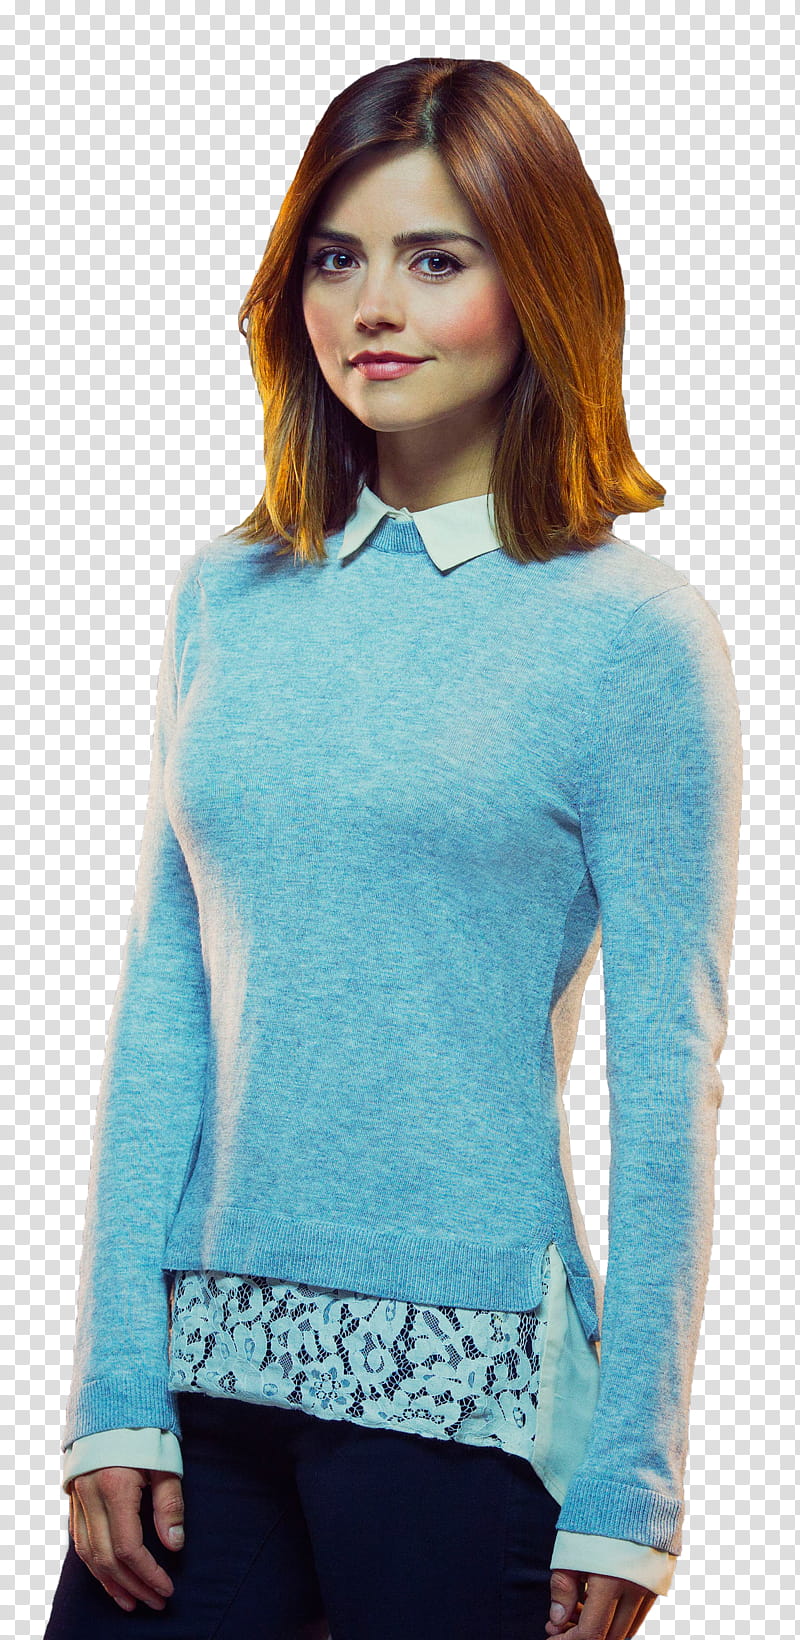 Doctor Who Season , woman wearing blue long-sleeved shirt transparent background PNG clipart